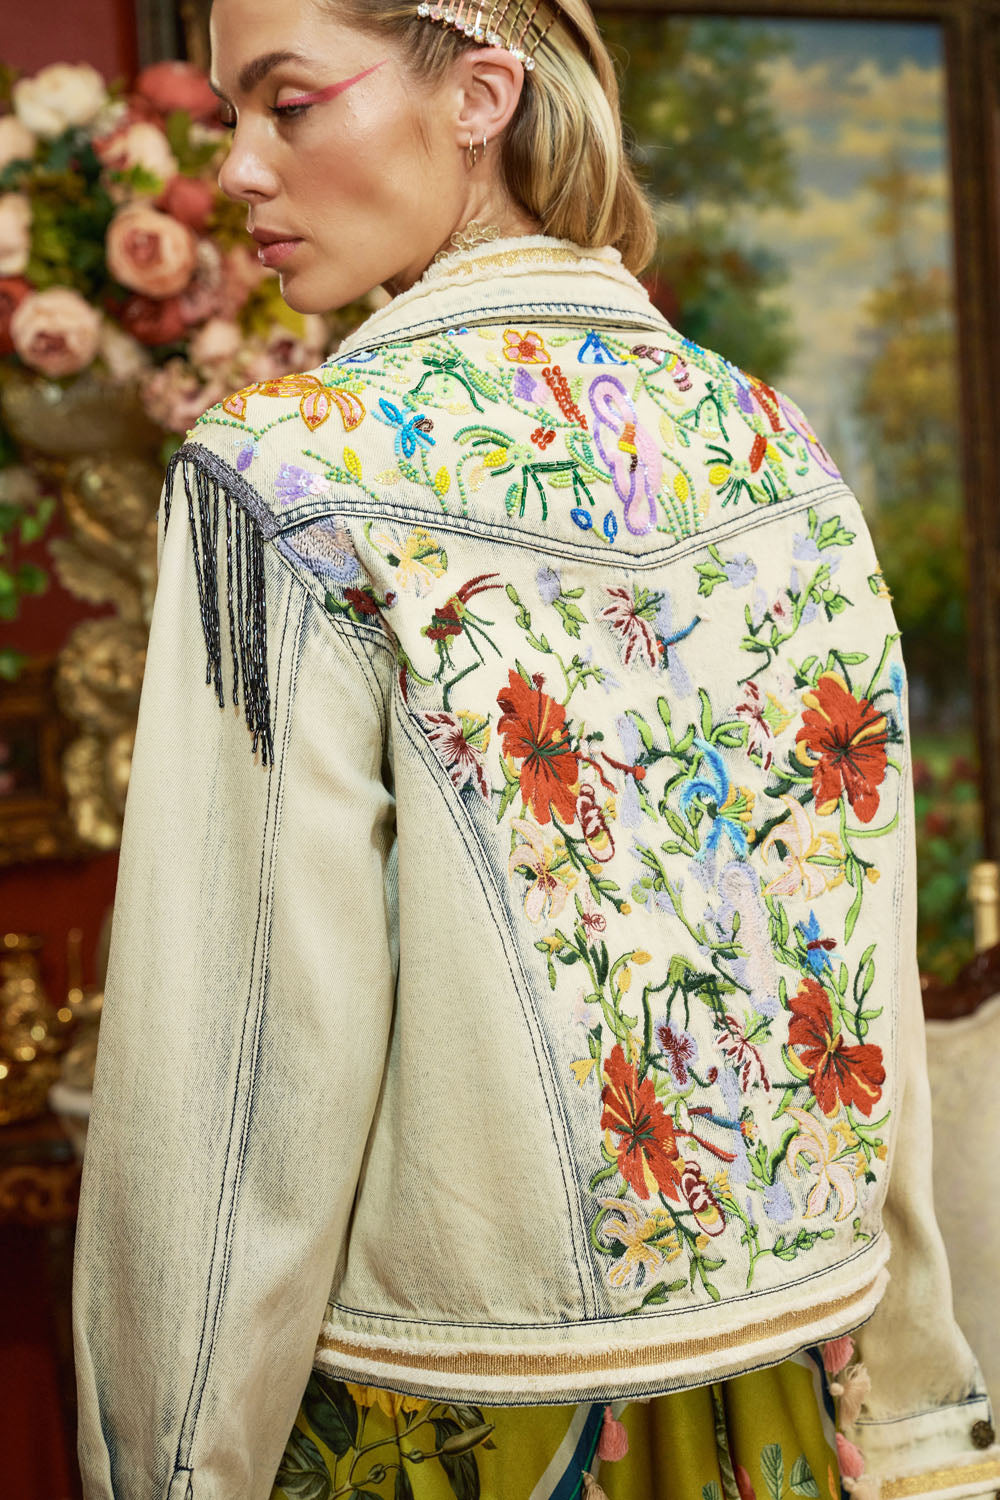 Country Queen Embellished Denim Jacket by Aratta